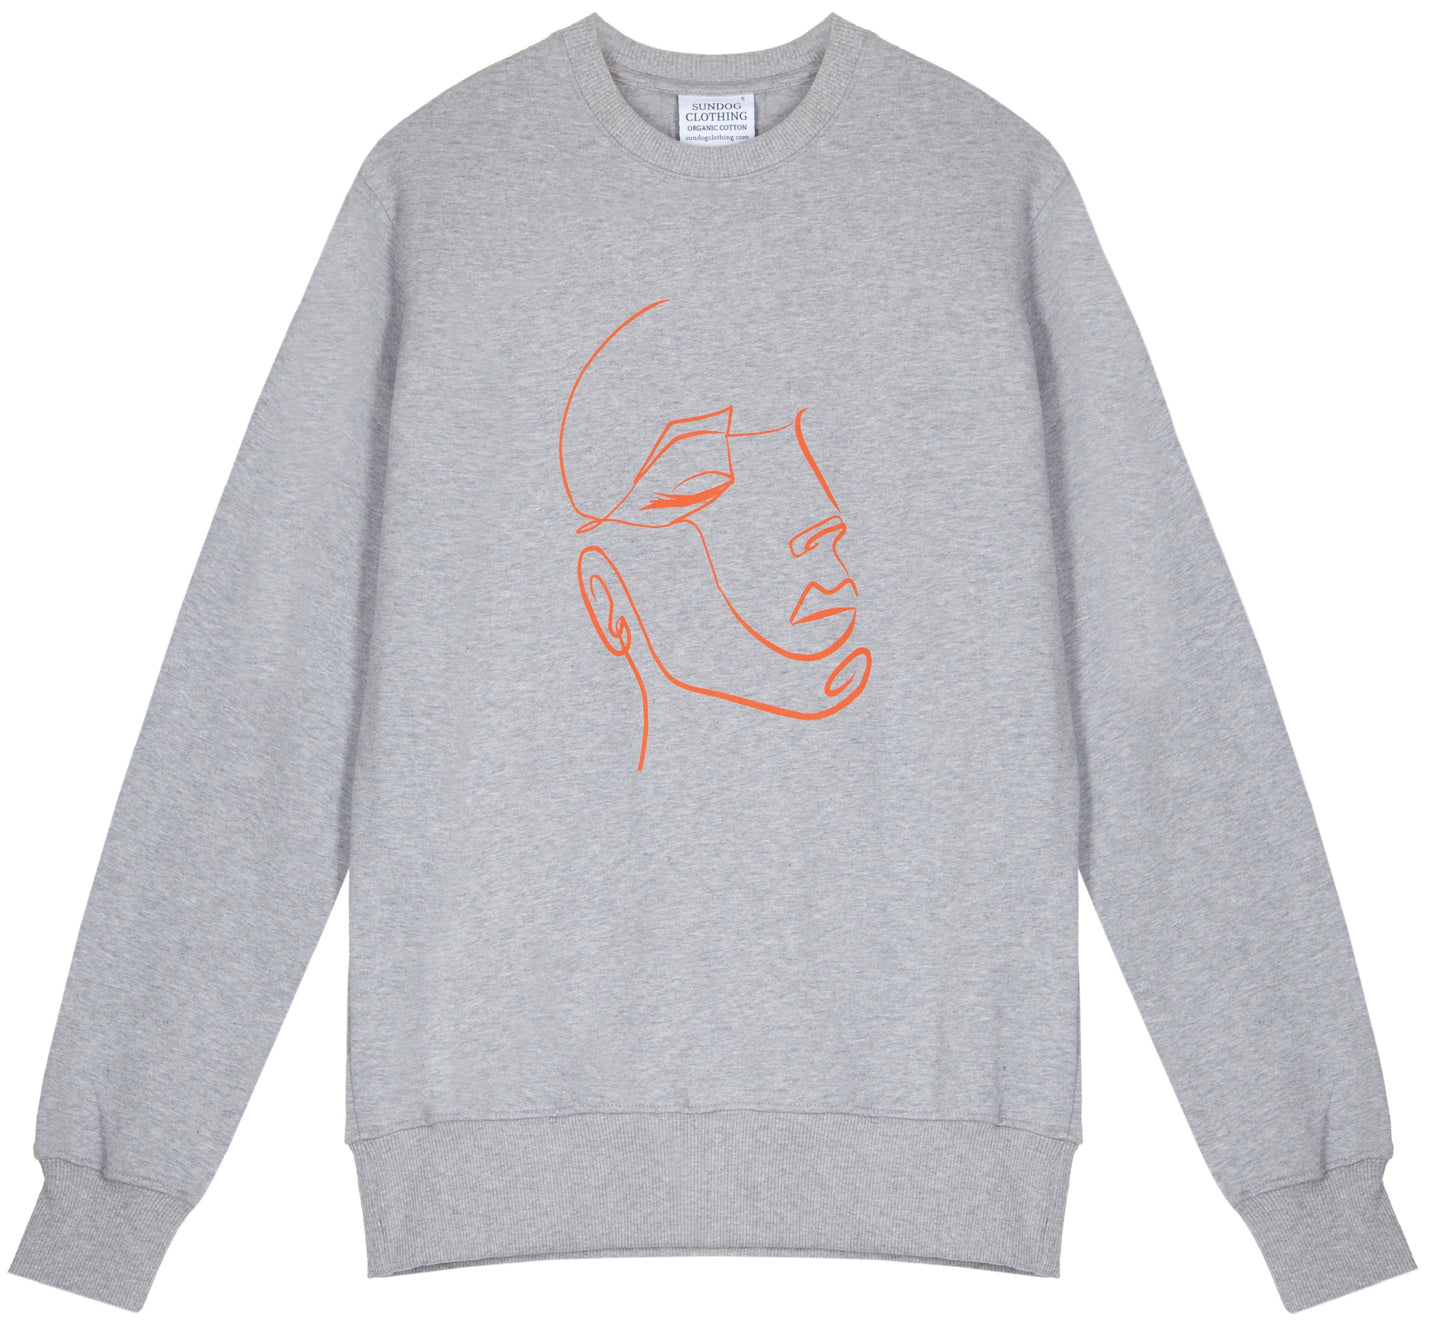 Unisex classic crew grey marl sweatshirt, made from GOTS certified organic cotton with FaceIN print in Clementine printed with plastic free inks